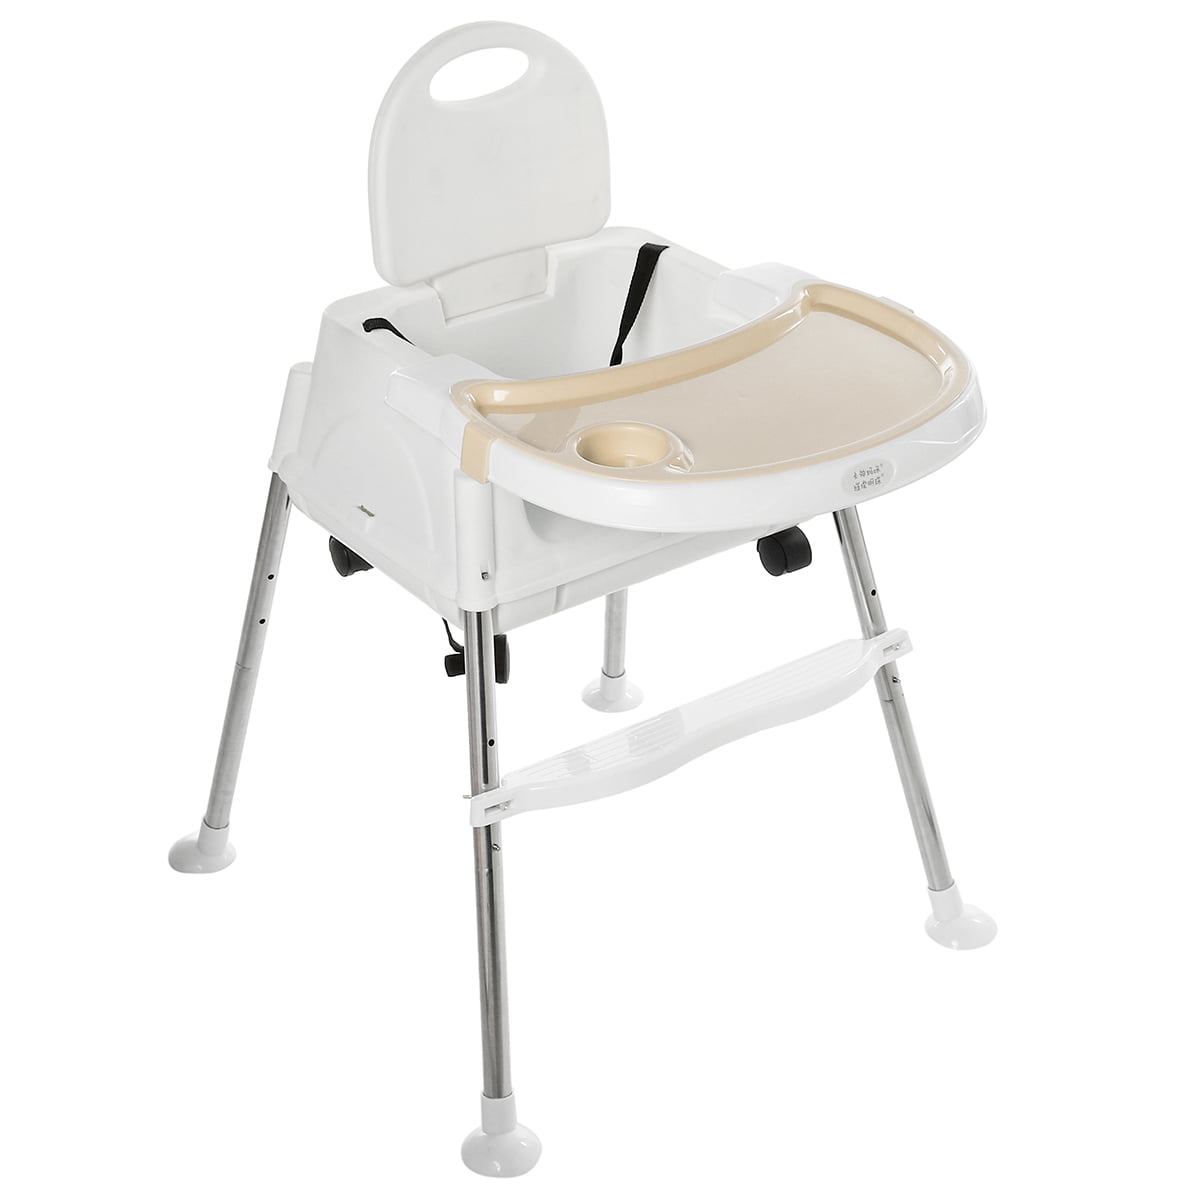 Baby Highchair Infant High Feeding Tray 3 in 1 Toddler Table Chair Wooden 50kg